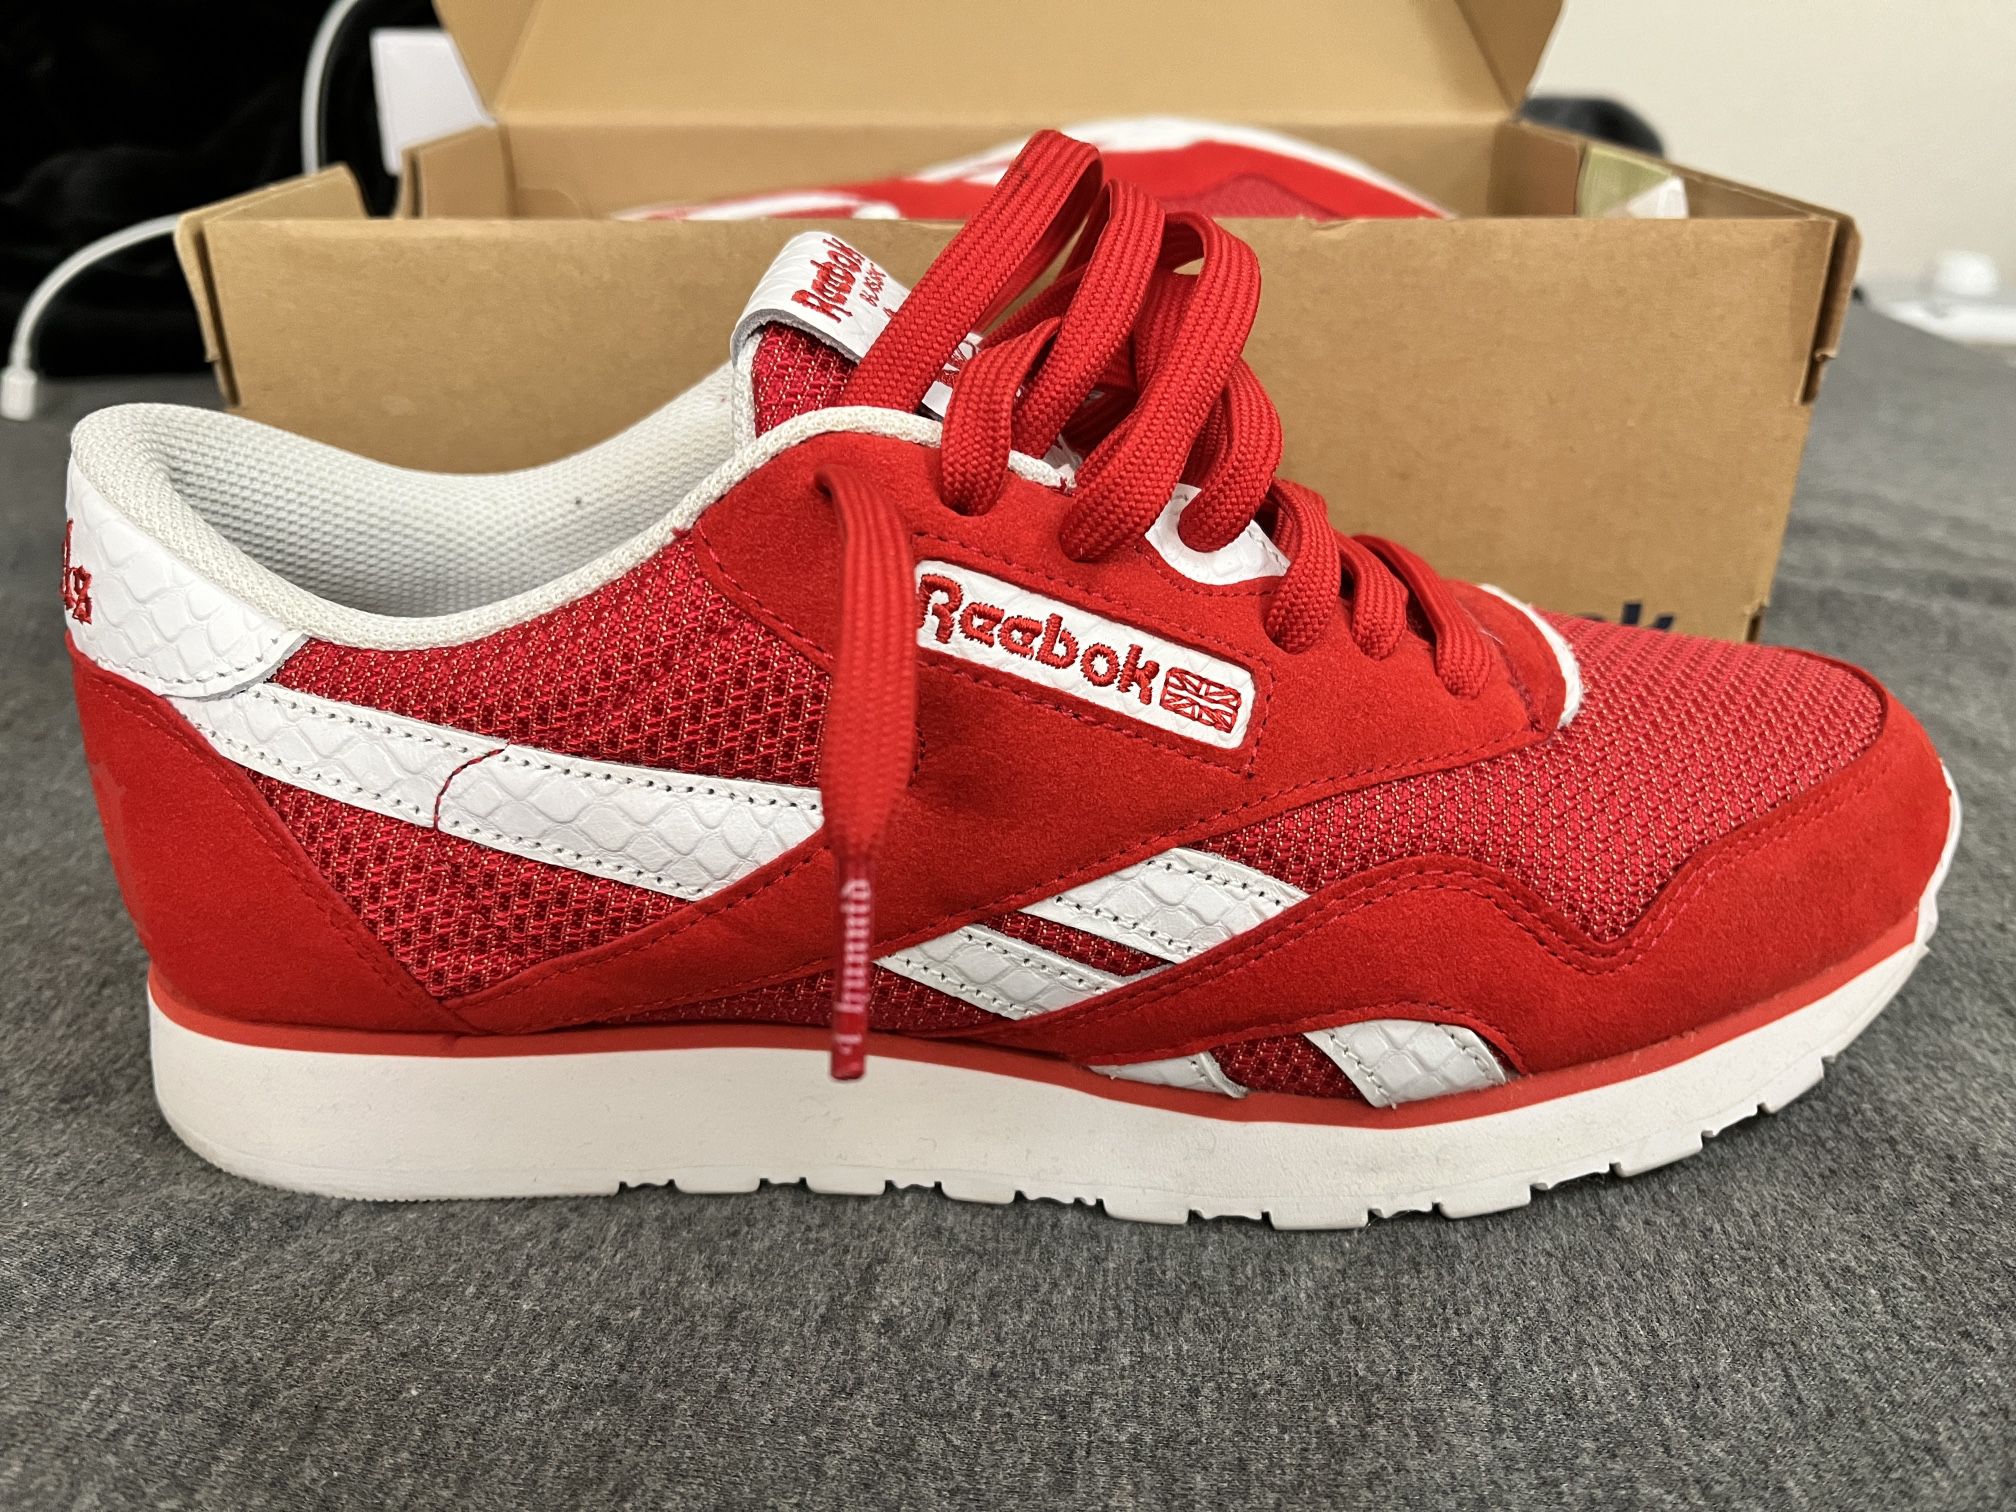 flicker trimme svamp RARE Reebok X YG Kevlar 4HUNNID 400 Red Blassic Classic CL Nylon Men's  Sneaker Size 9 for Sale in Tacoma, WA - OfferUp